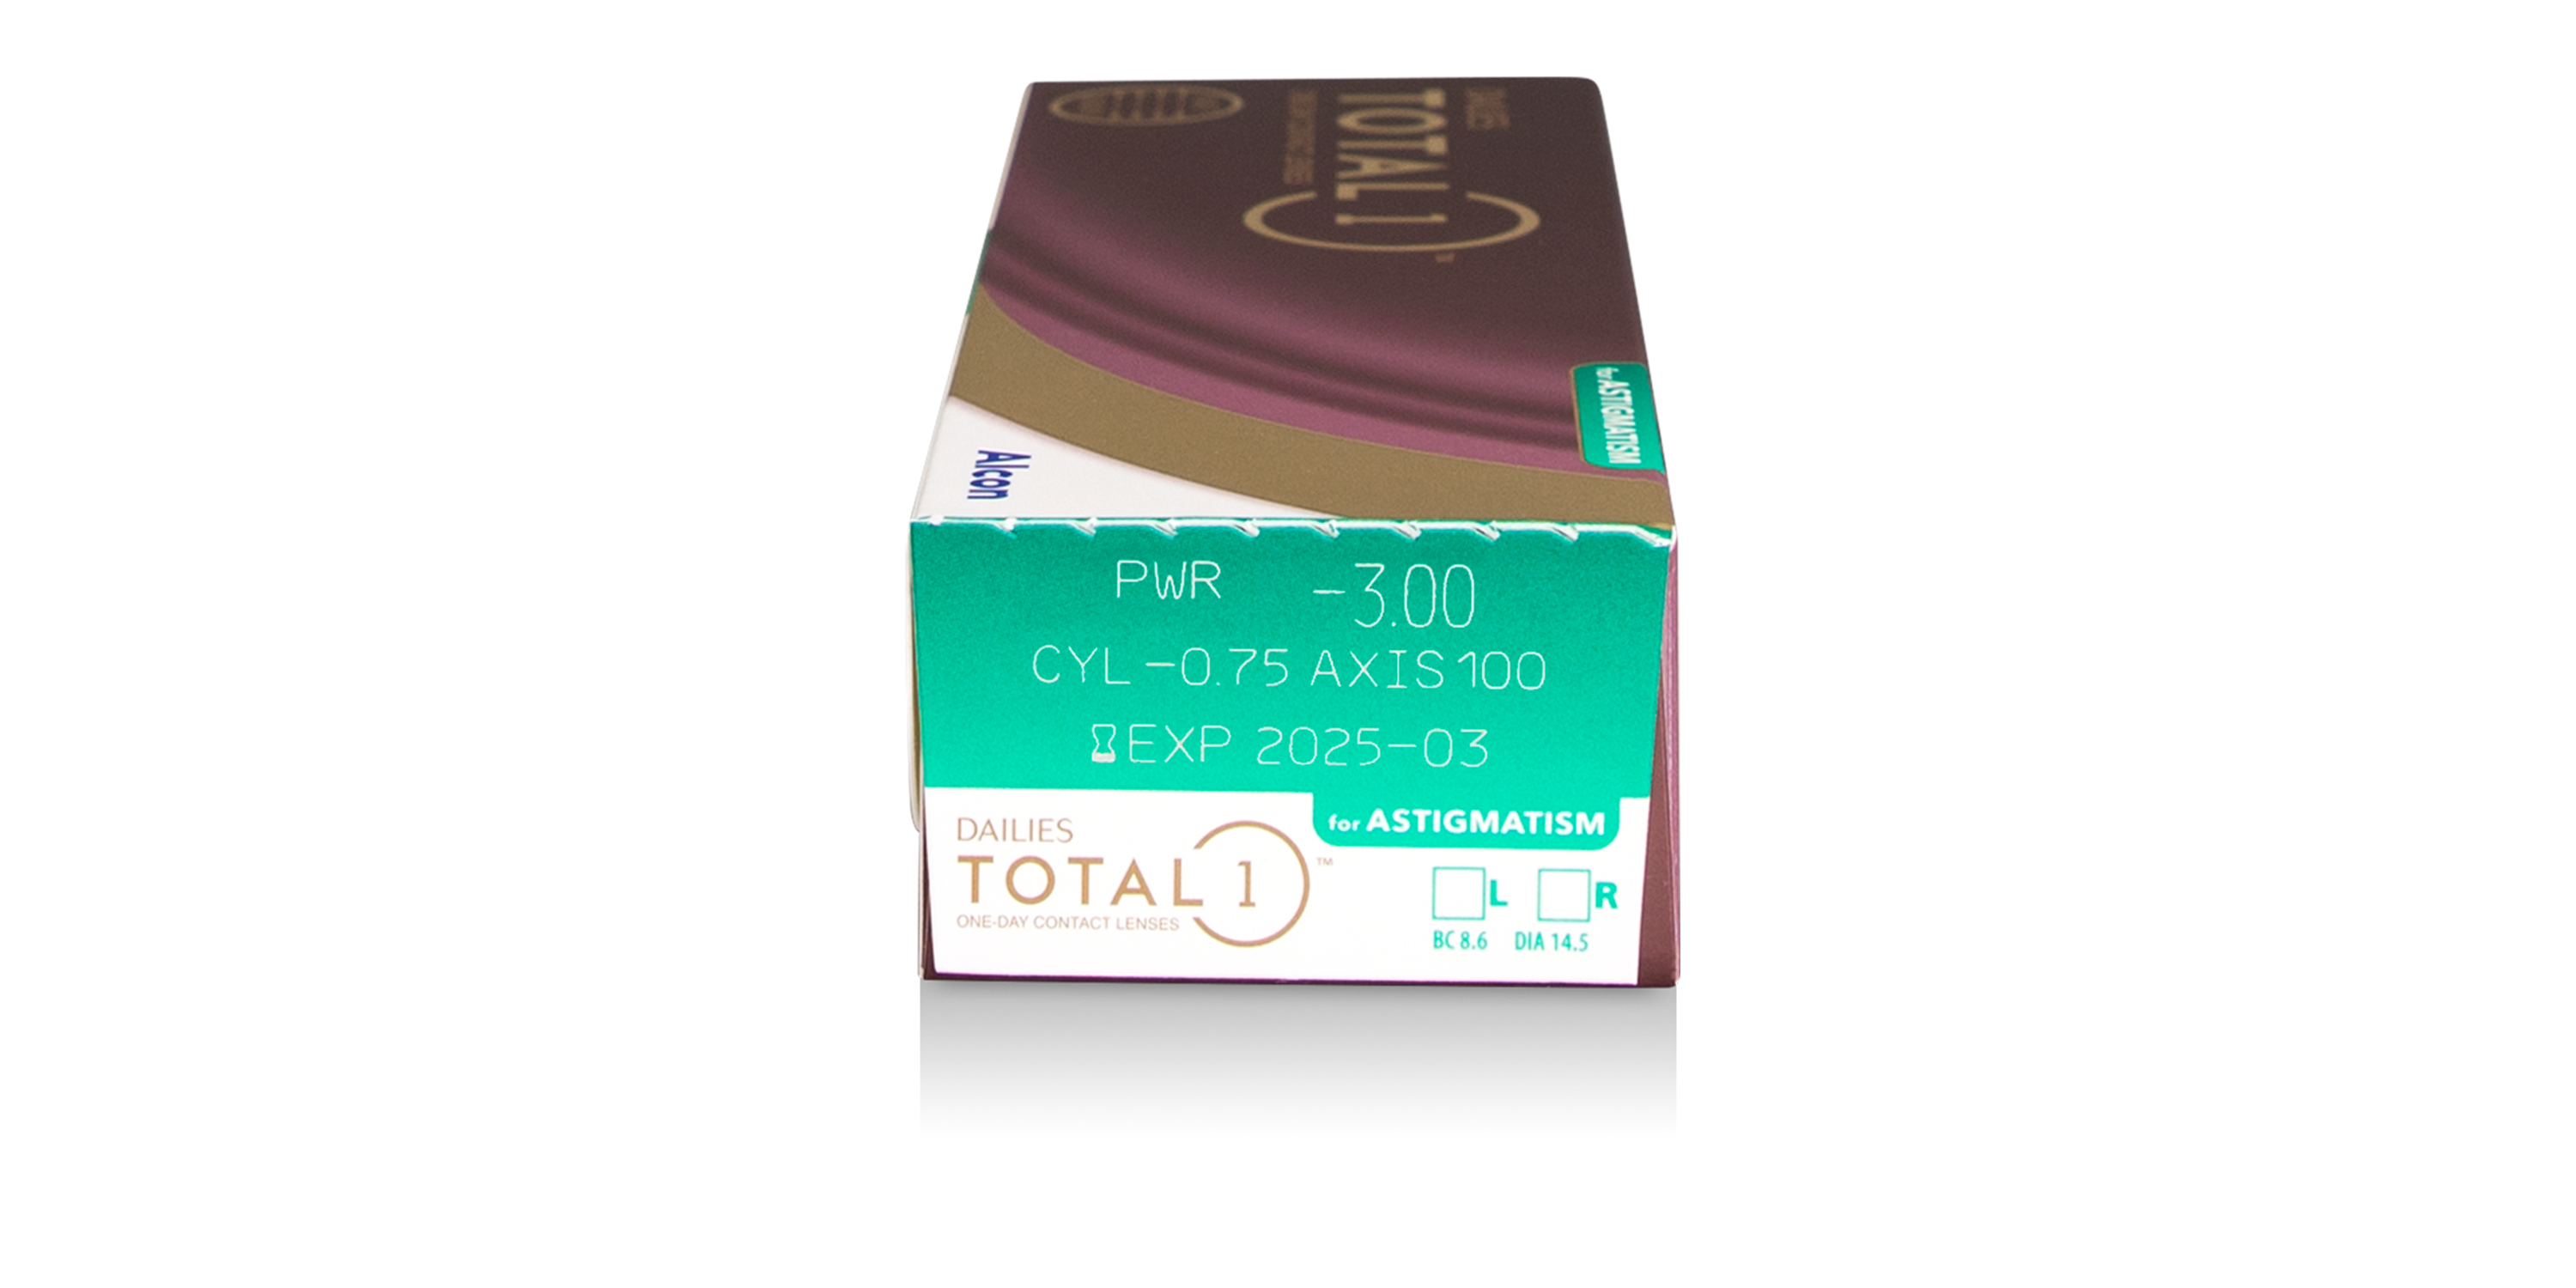 DAILIES TOTAL1® for Astigmatism, 30 Pack